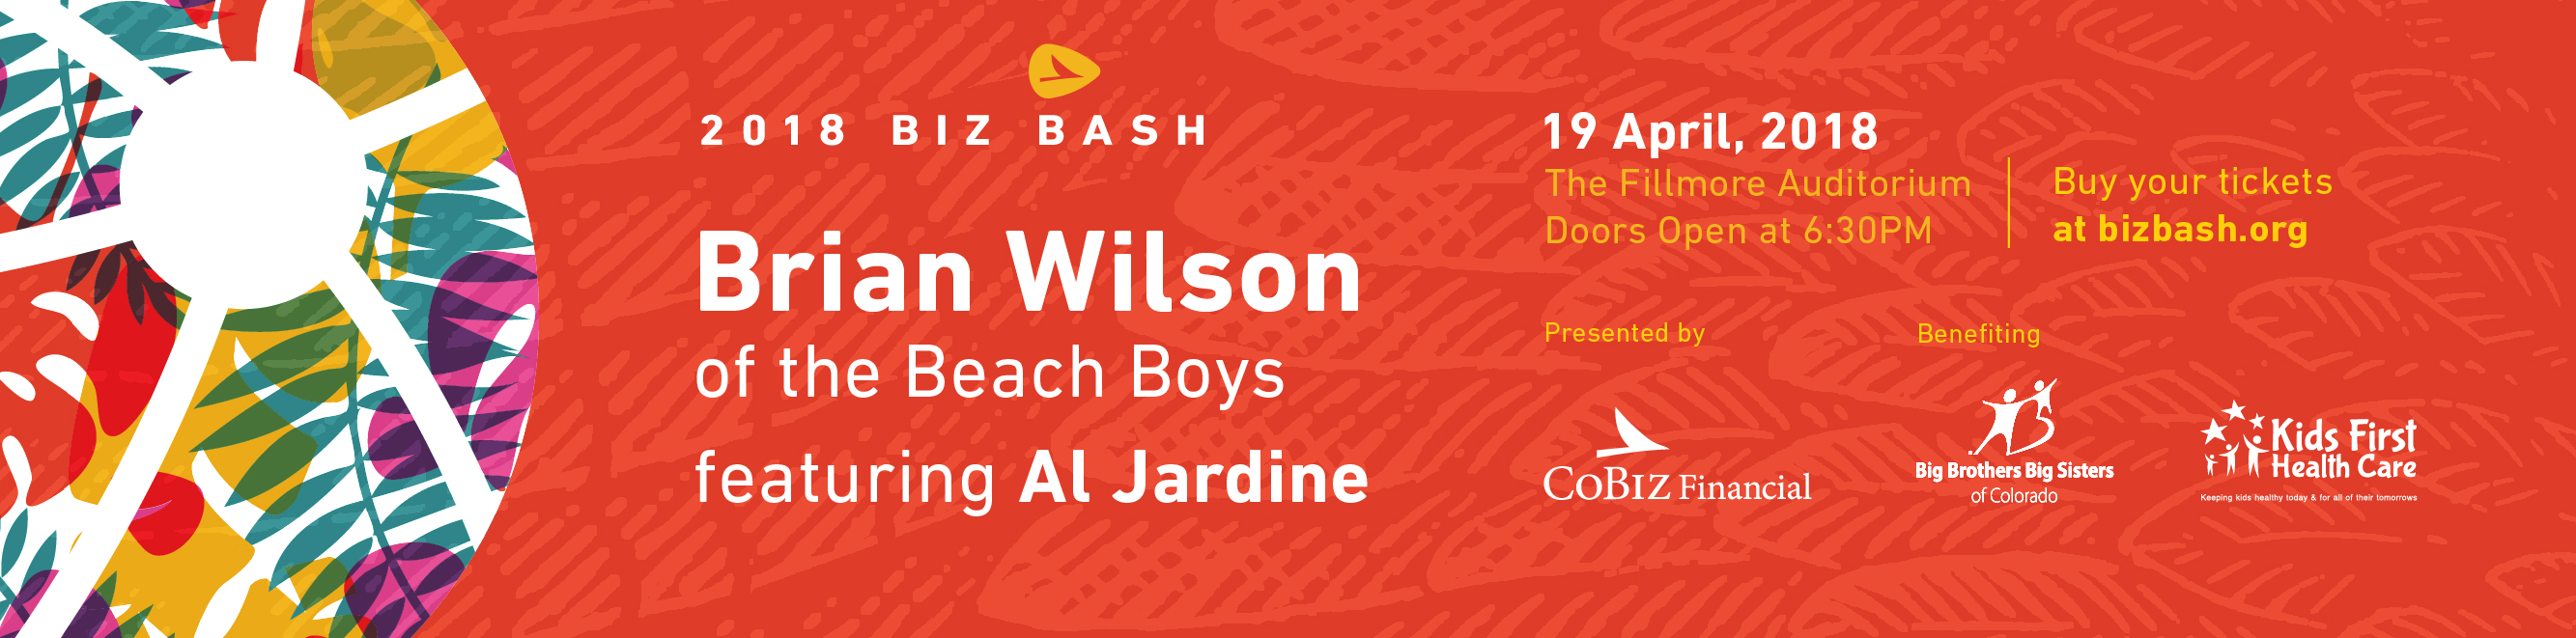 Kids First Health Care to be a Biz Bash beneficiary for CoBiz Financial’s annual concert fundraiser